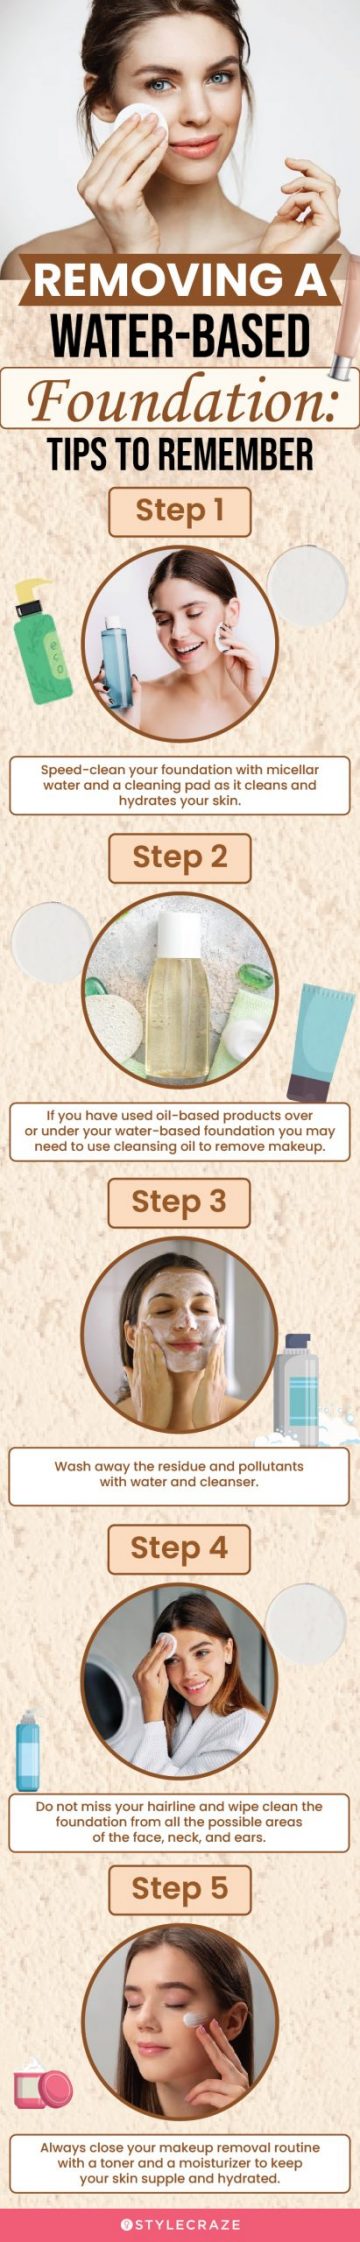 Removing A Water-Based Foundation: Tips To Remember (infographic)